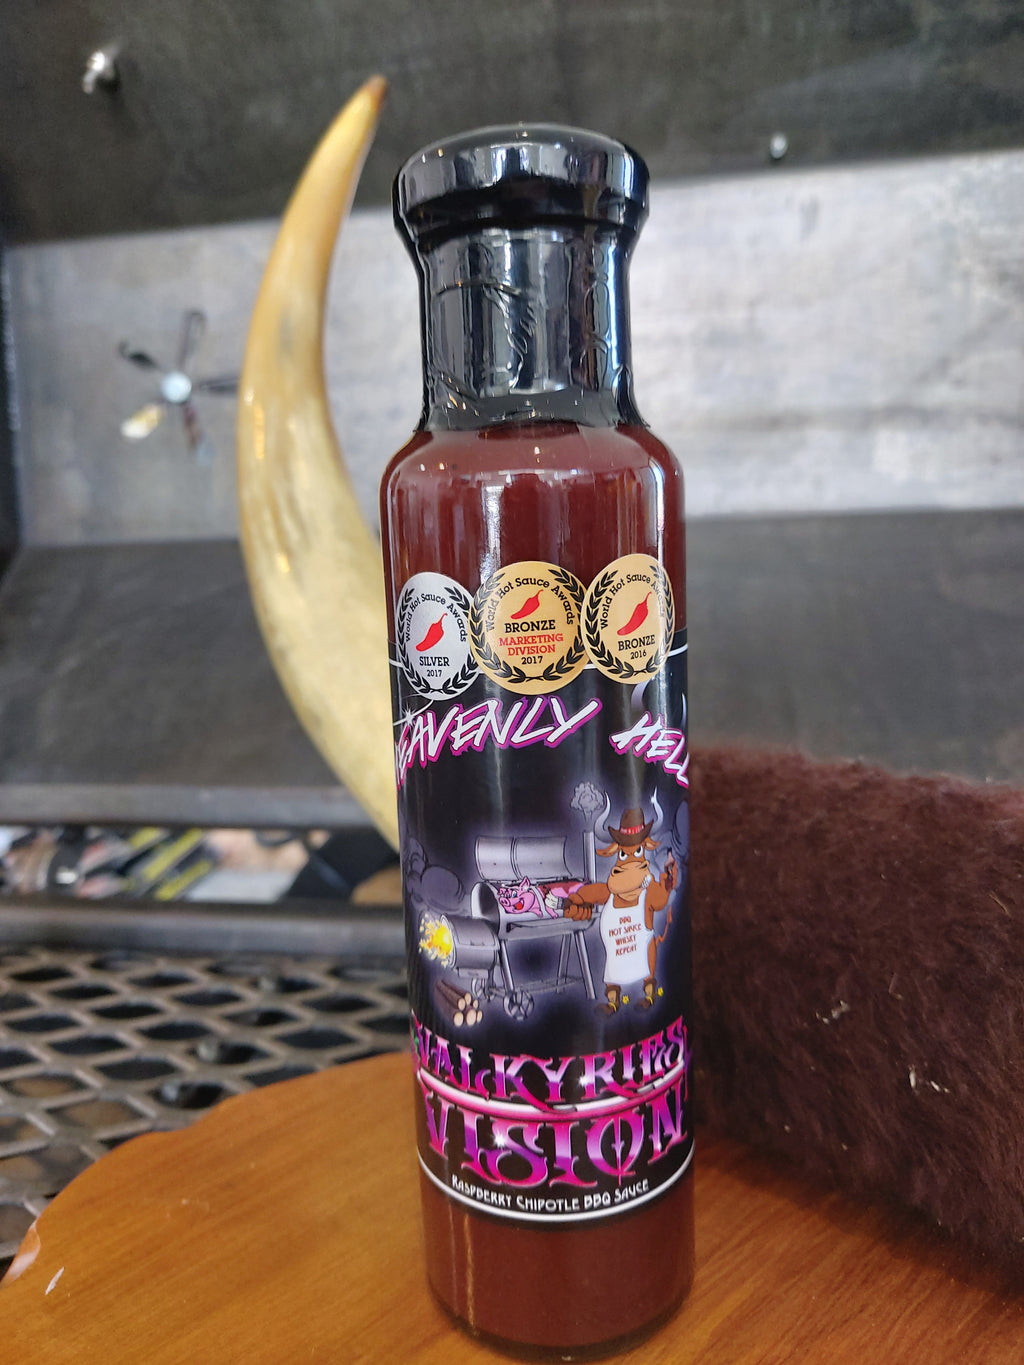 Valkyries Vision 250ml by Heavenly Hell